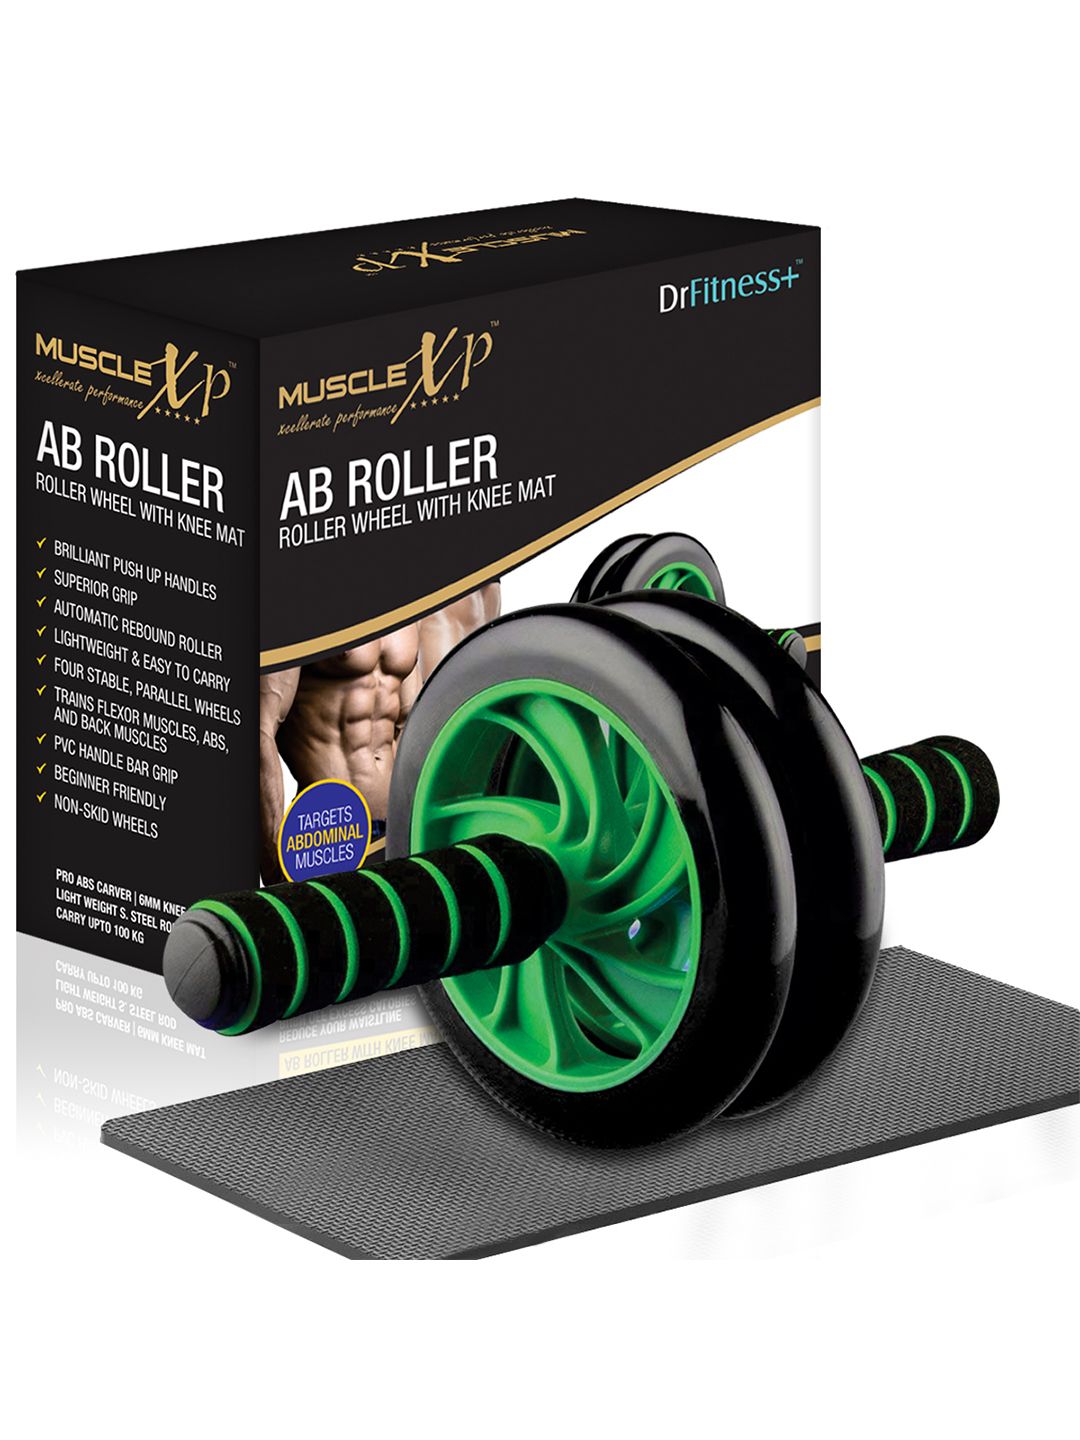 MUSCLEXP Black Solid Roller Wheel With Knee Mat Price in India